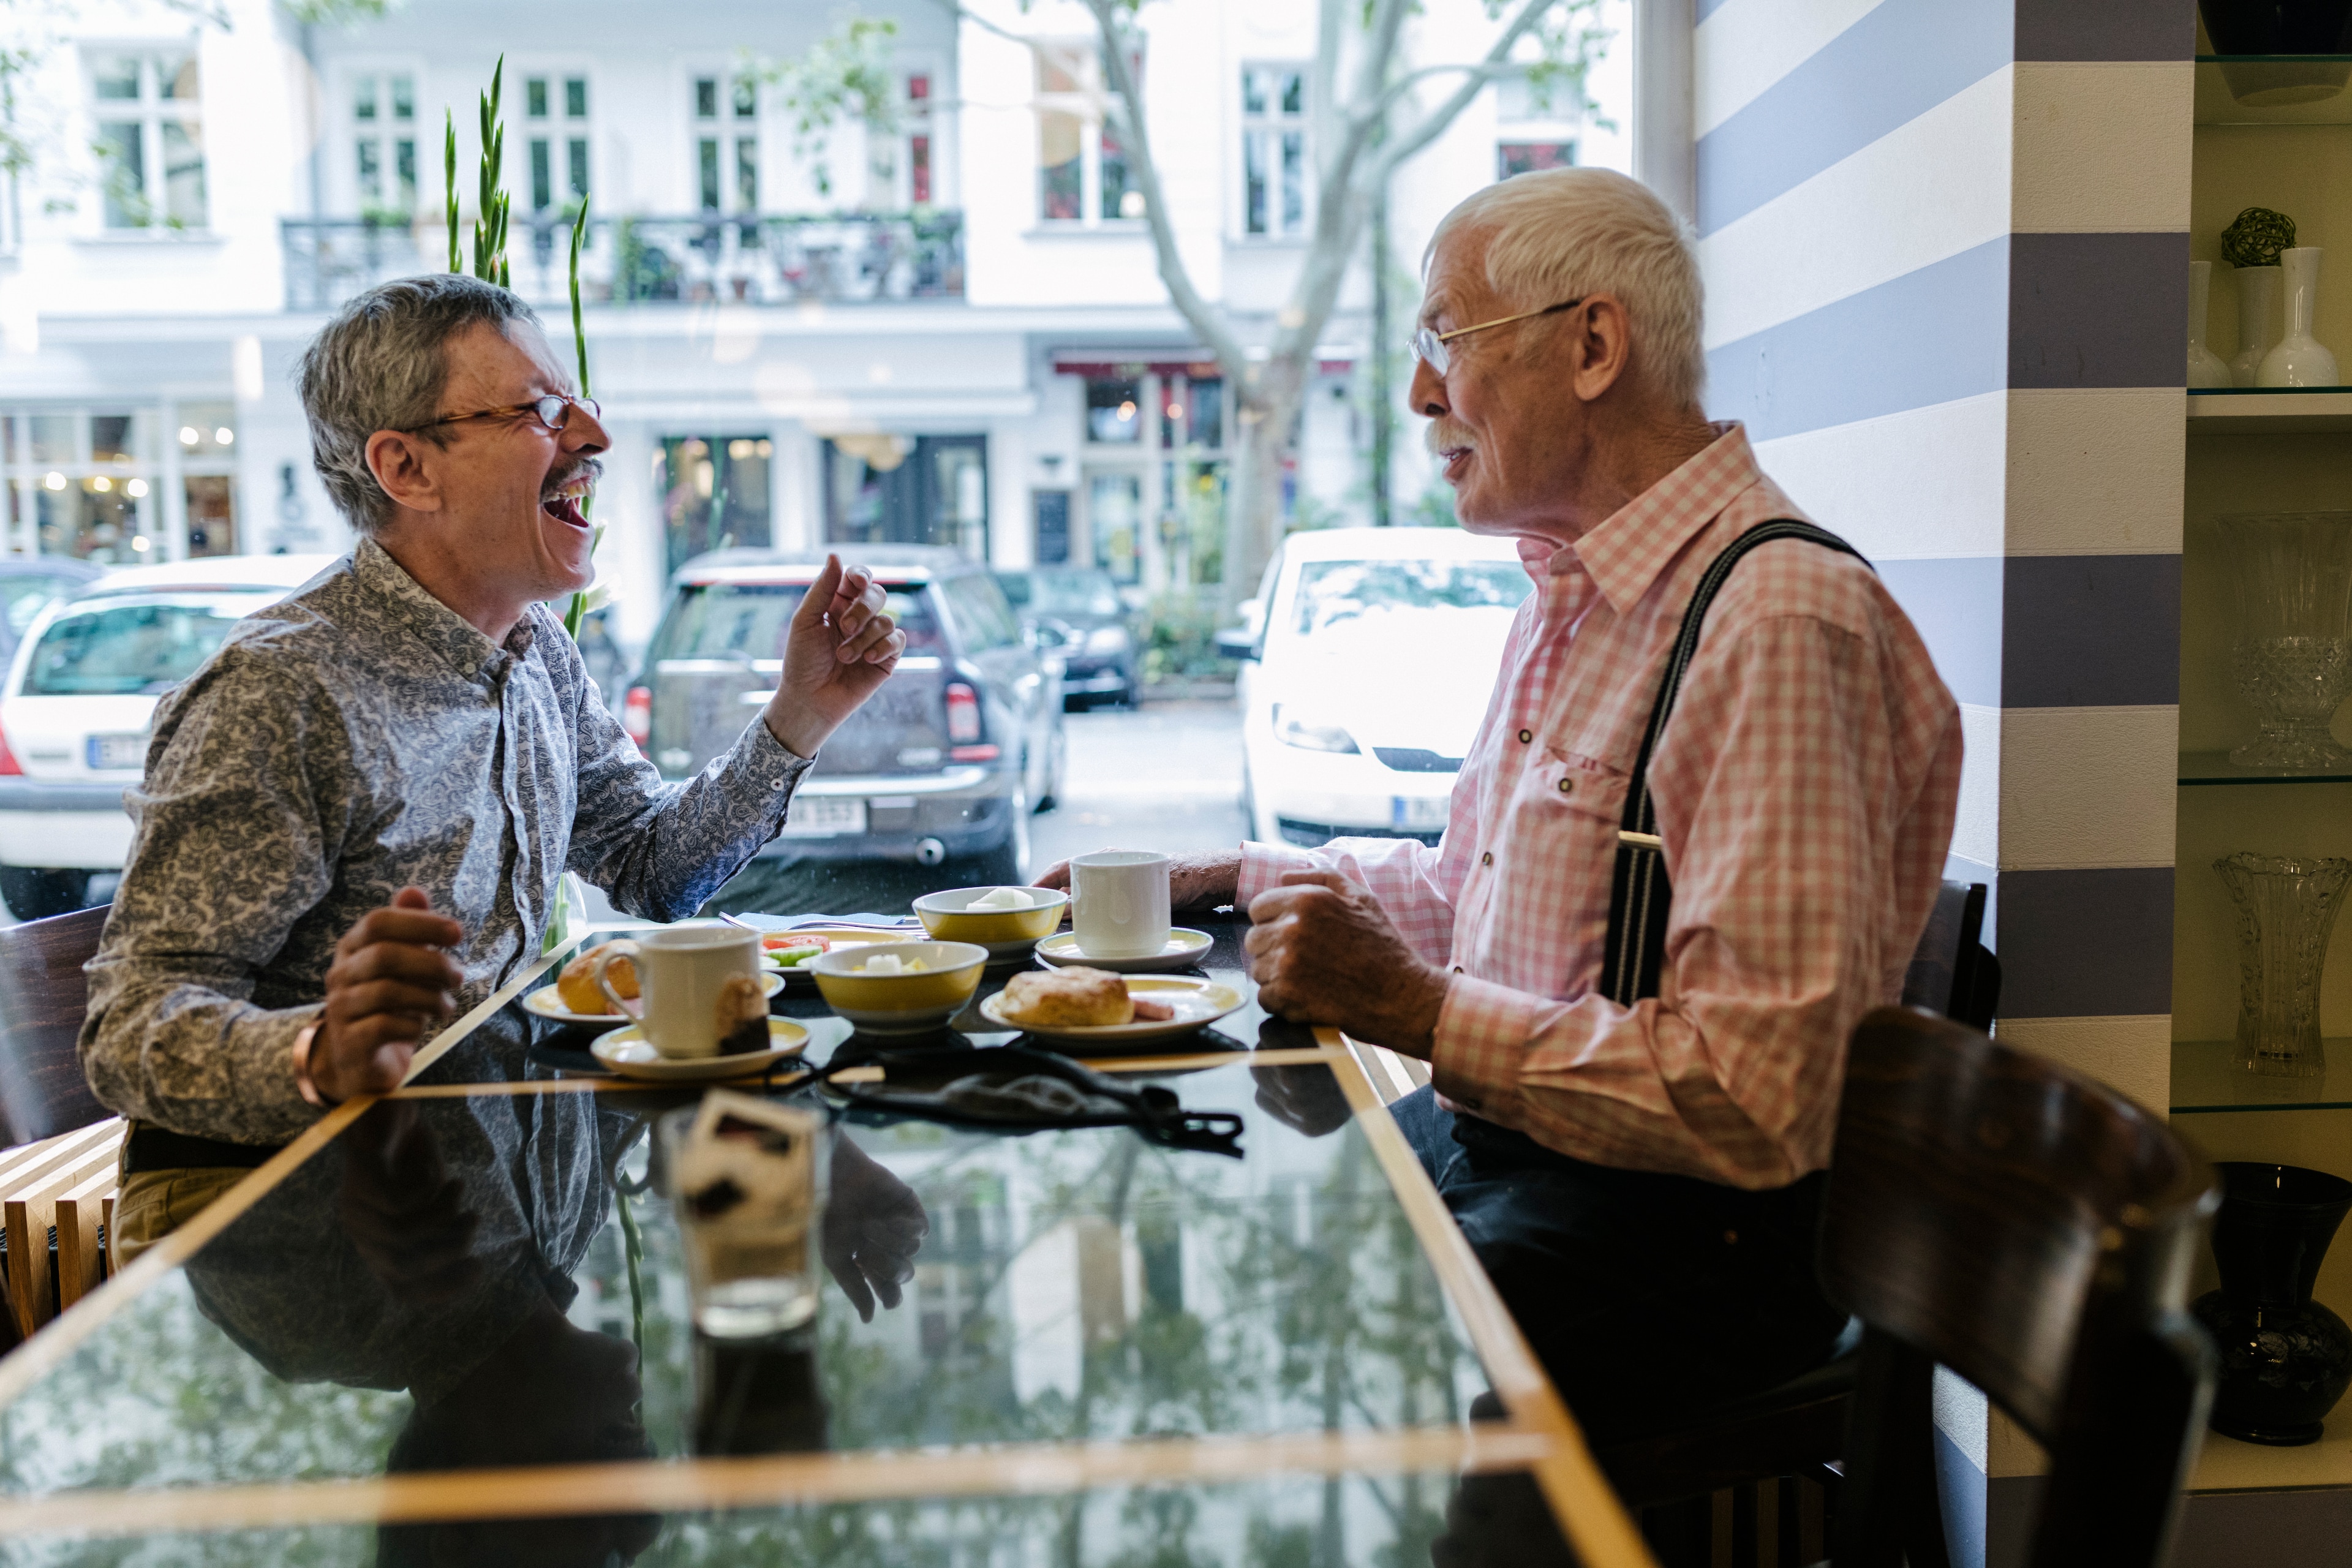 Two retired men laugh together at a cafe